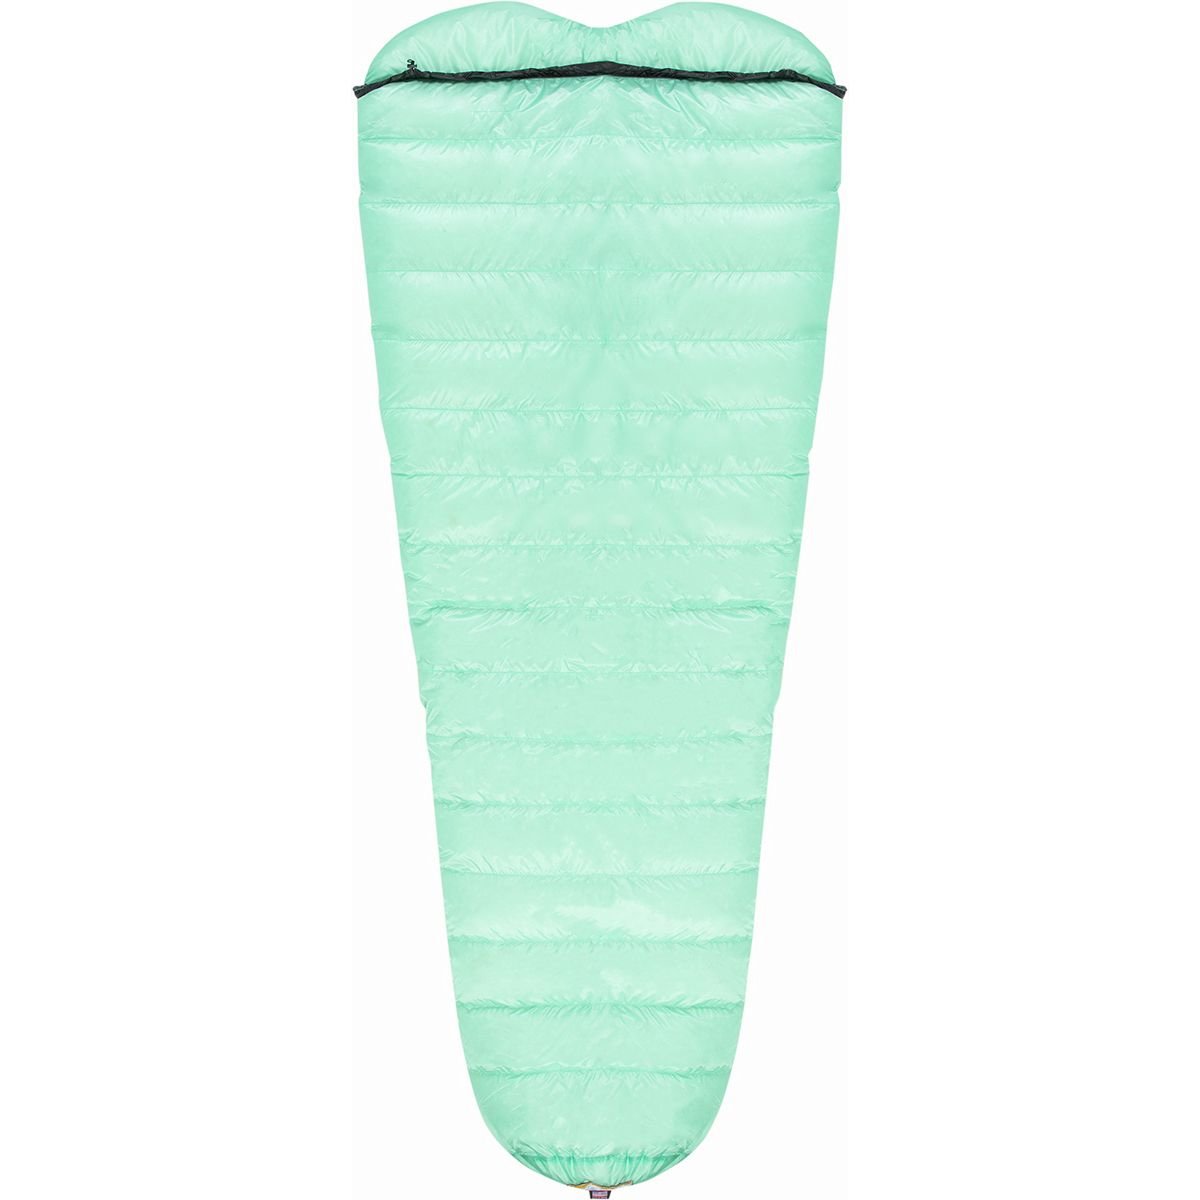 An image related to Western Mountaineering Astralite Quilt Taffeta Sleeping Bag